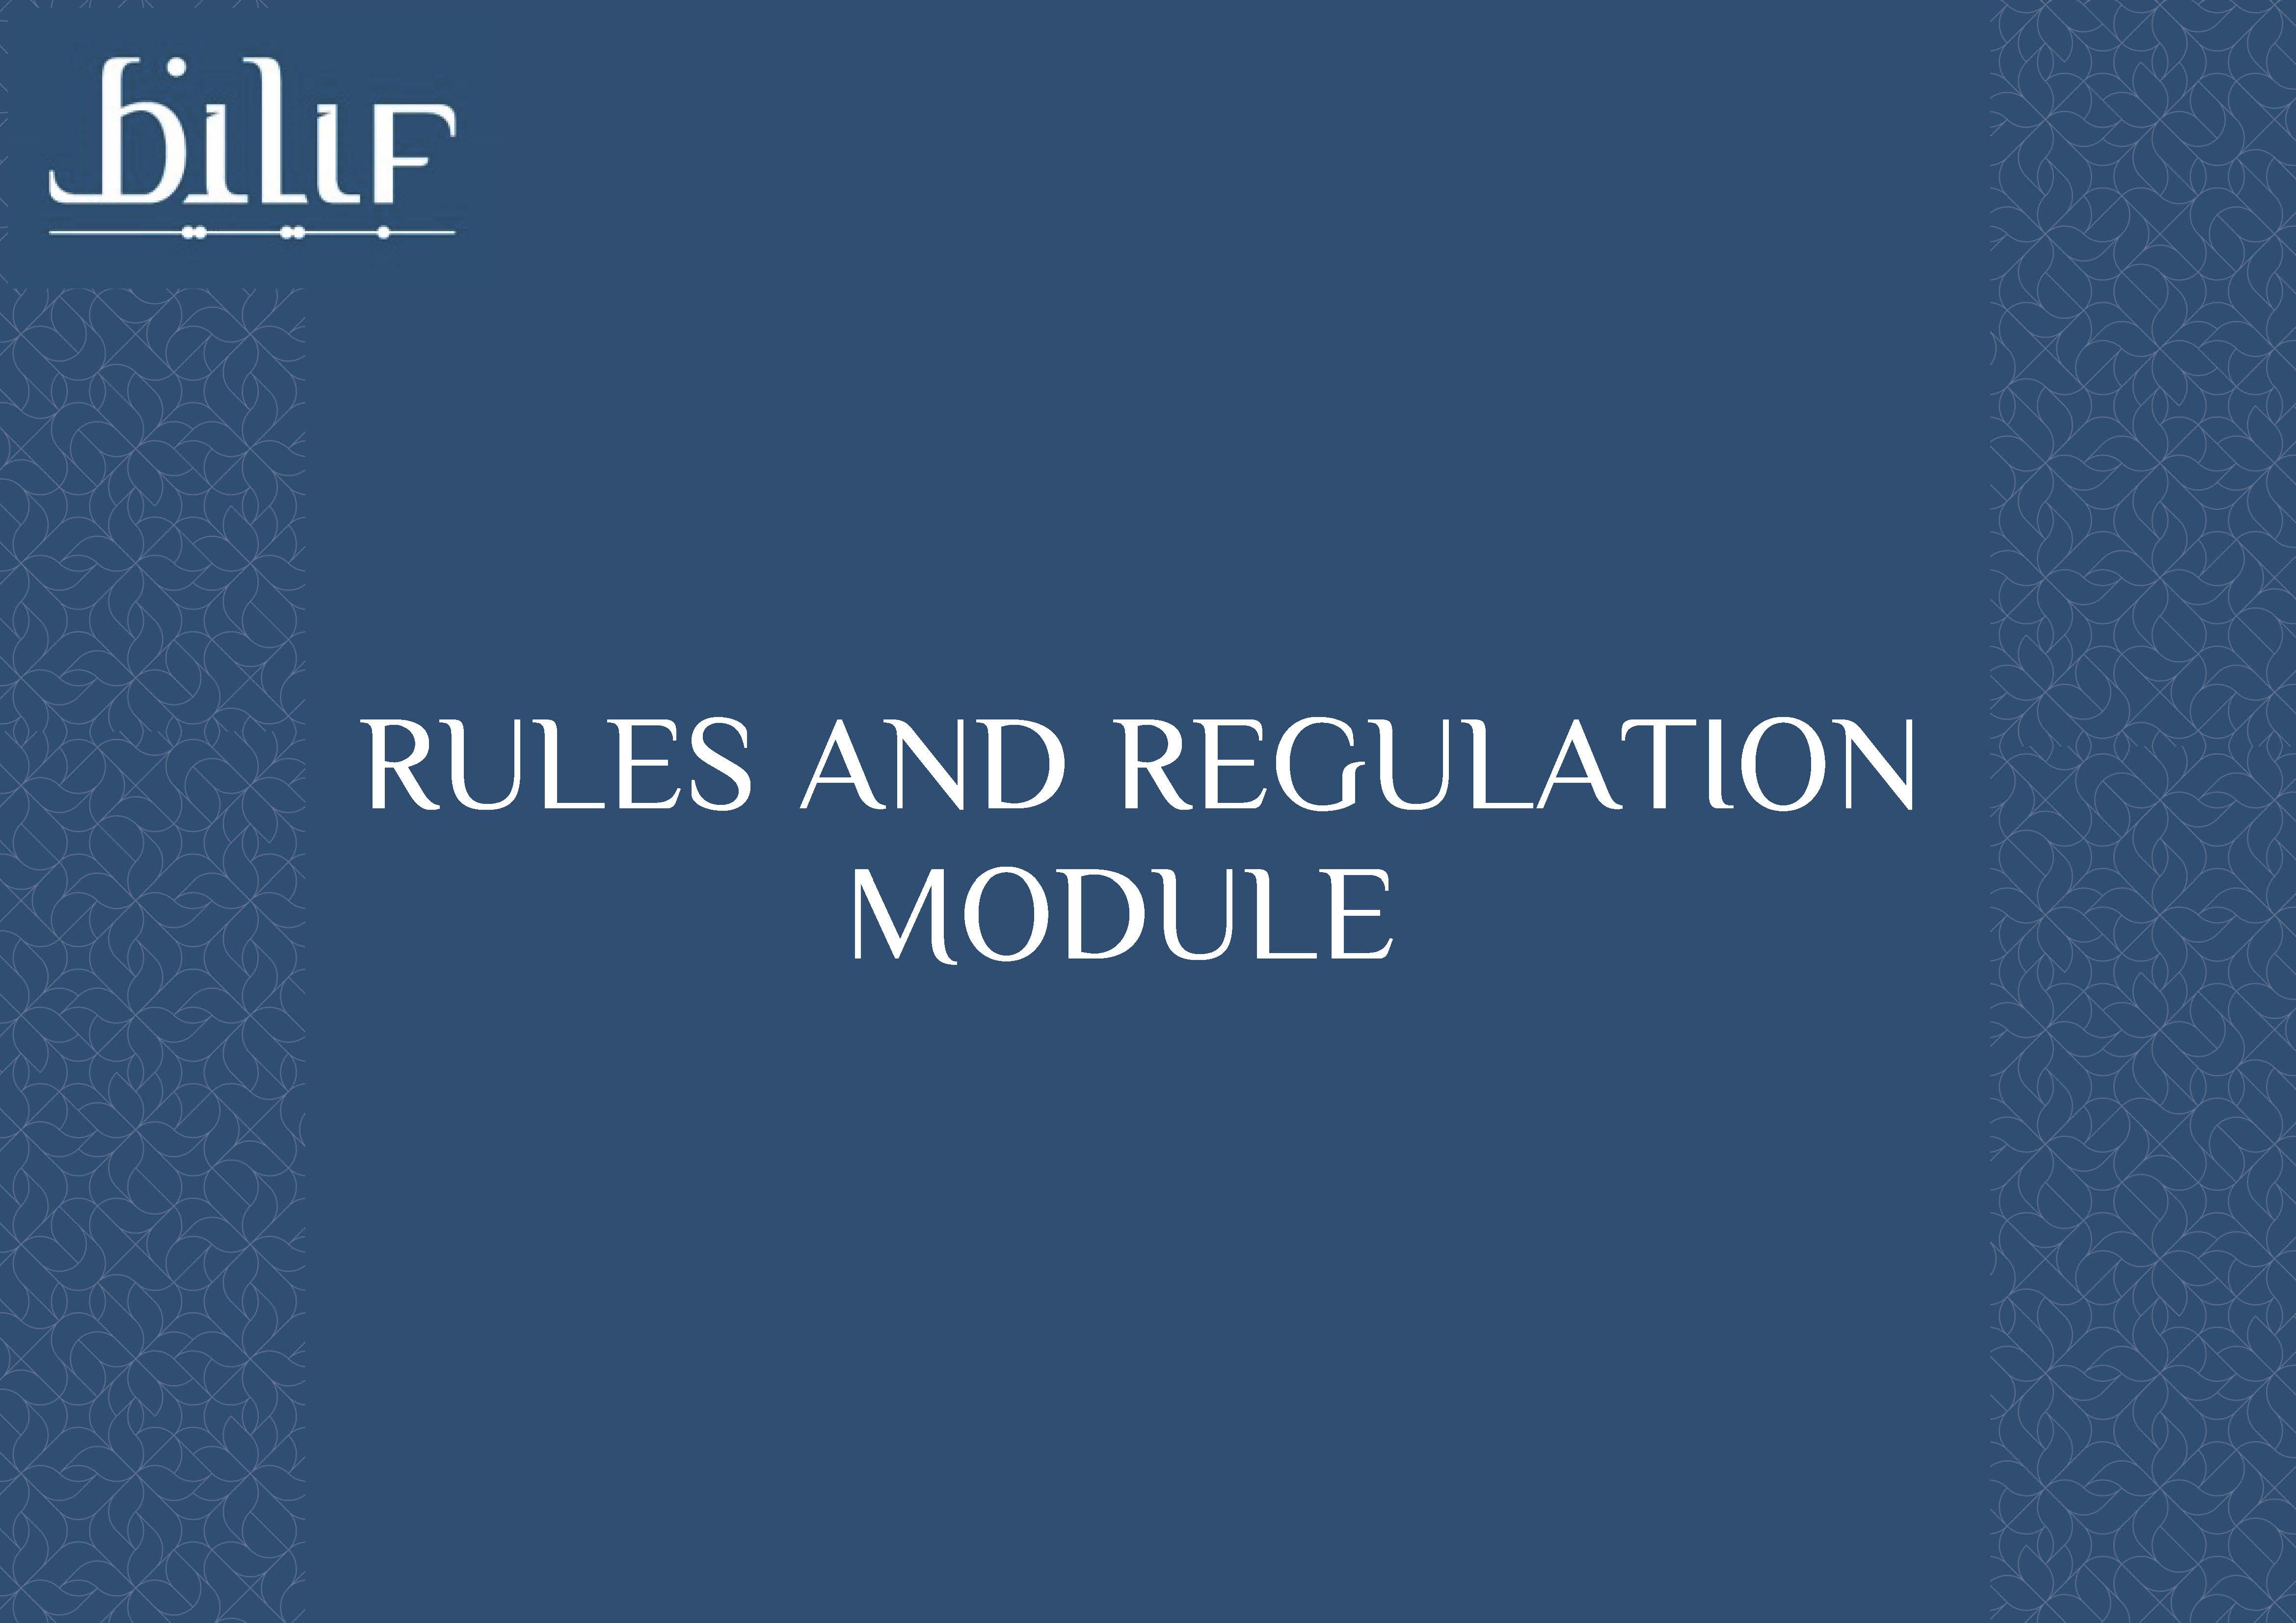 Rules and Regulation Module